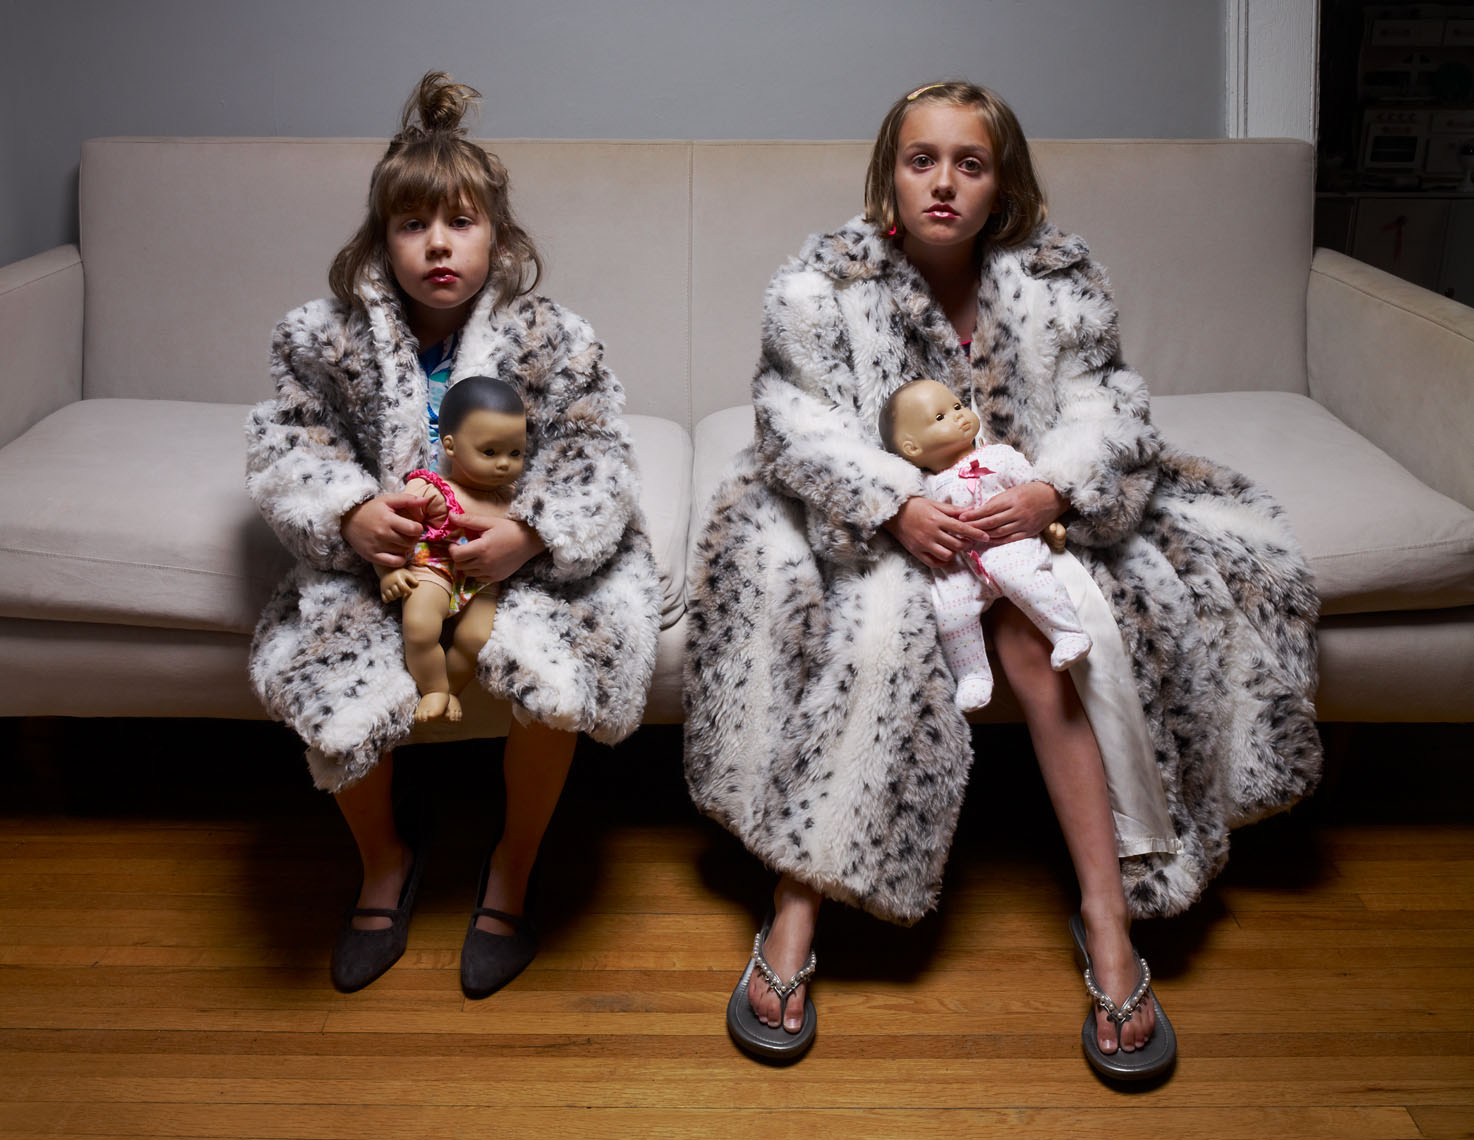 2 young sisters seated with fur coats and dolls portrait